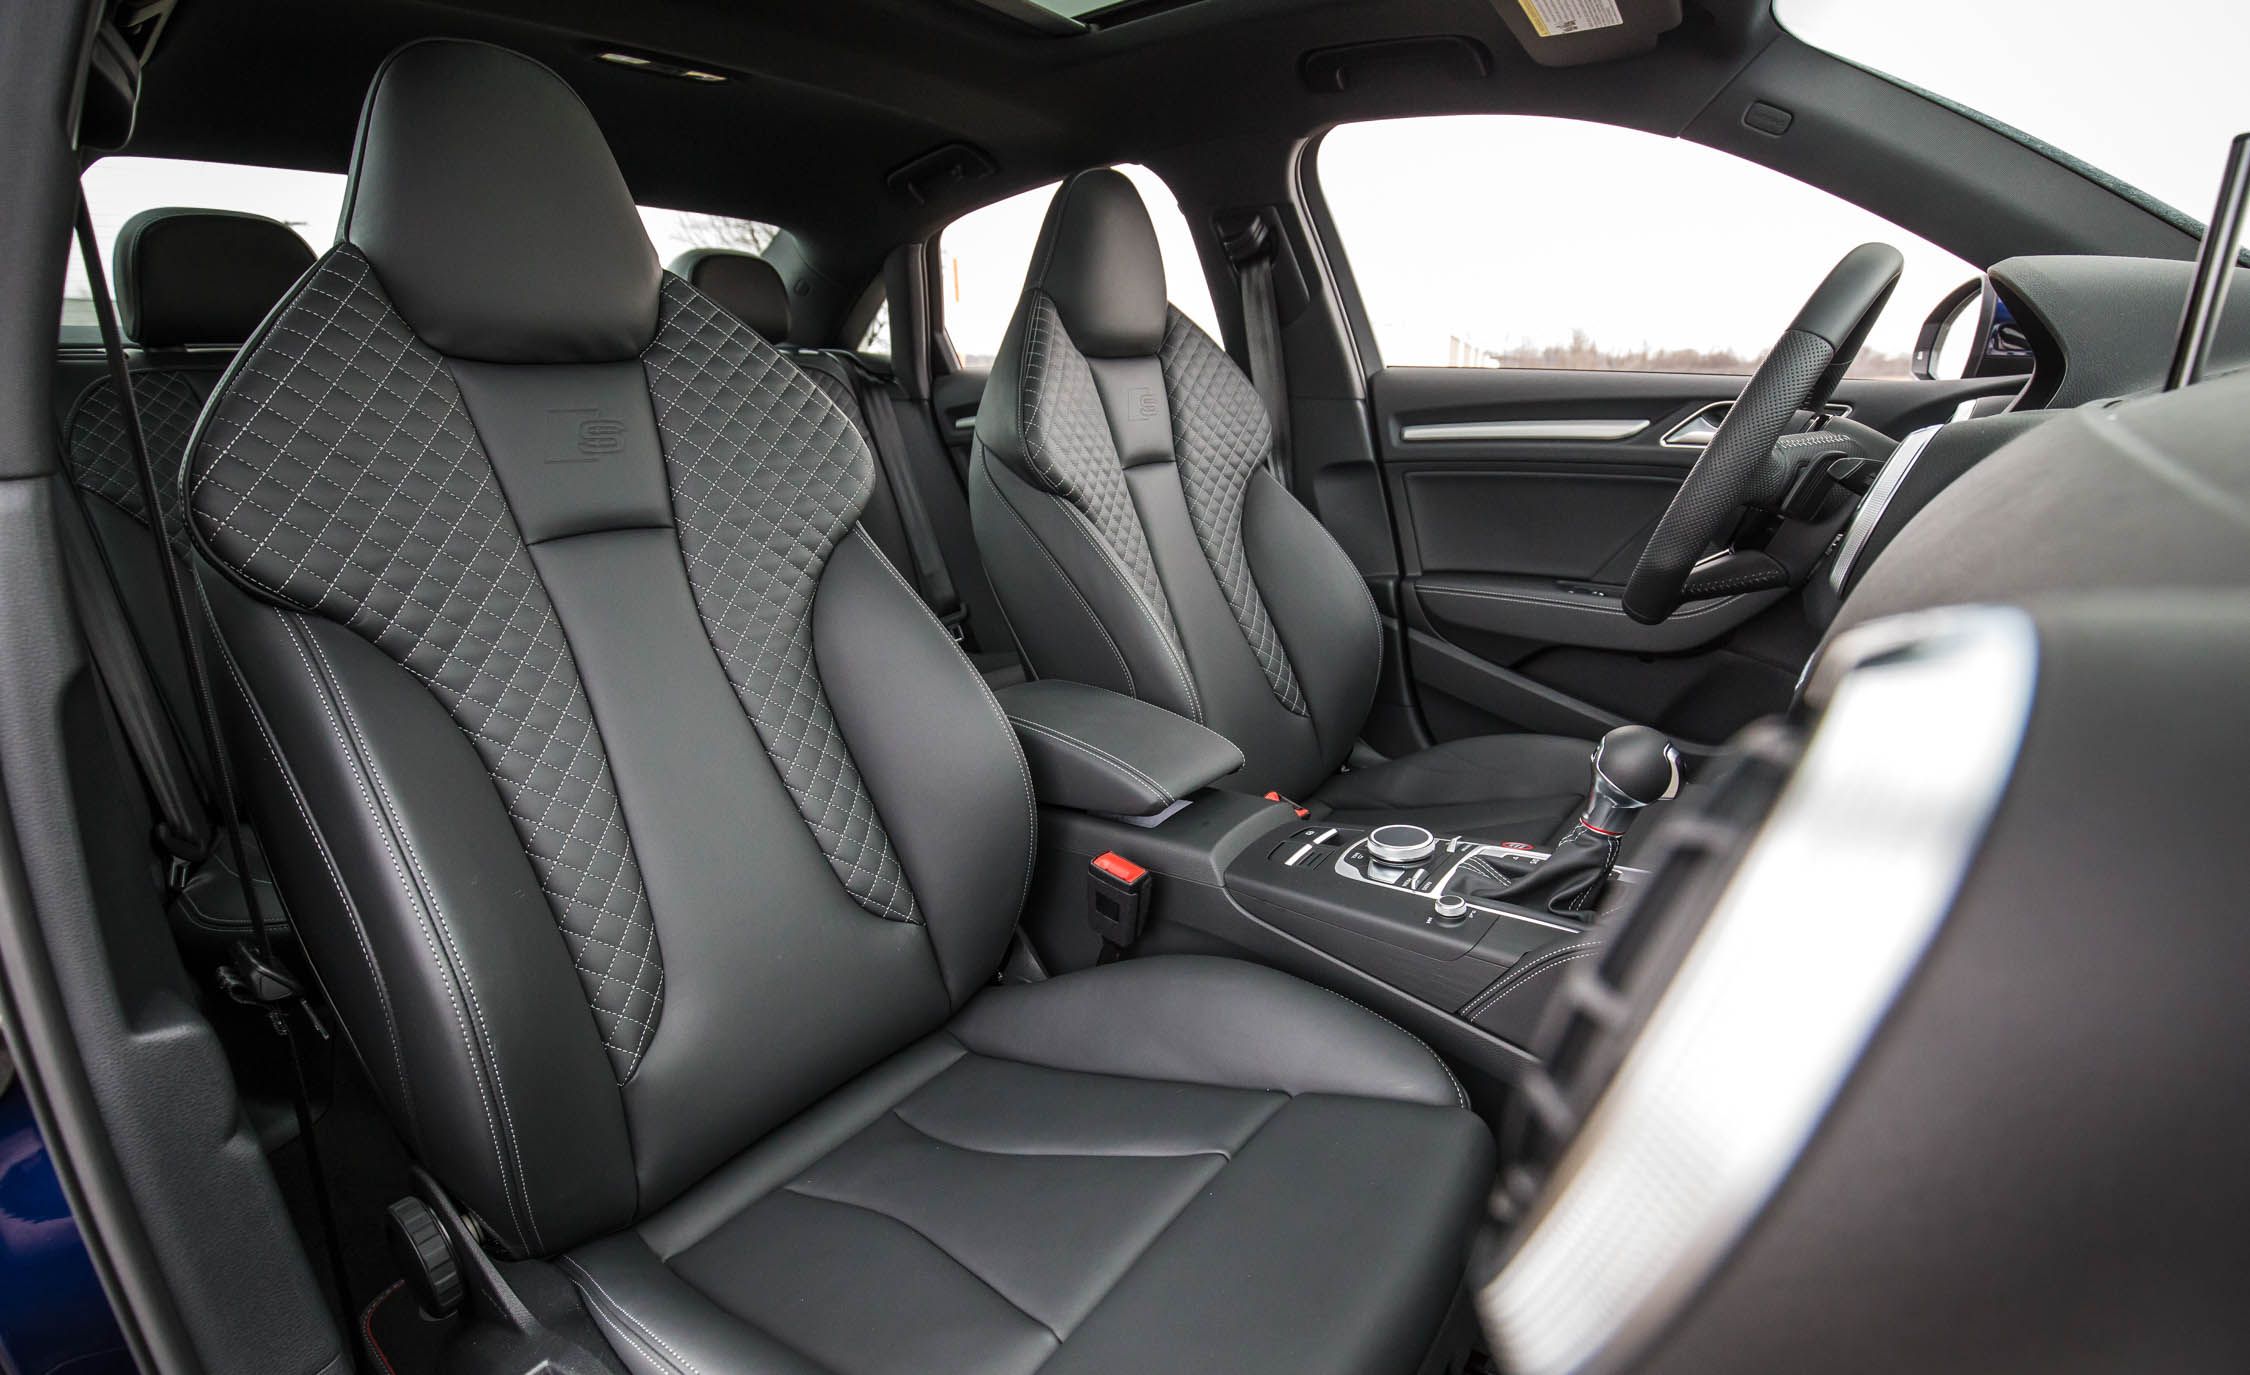 2017 Audi S3 Interior Seats Front (View 33 of 50)